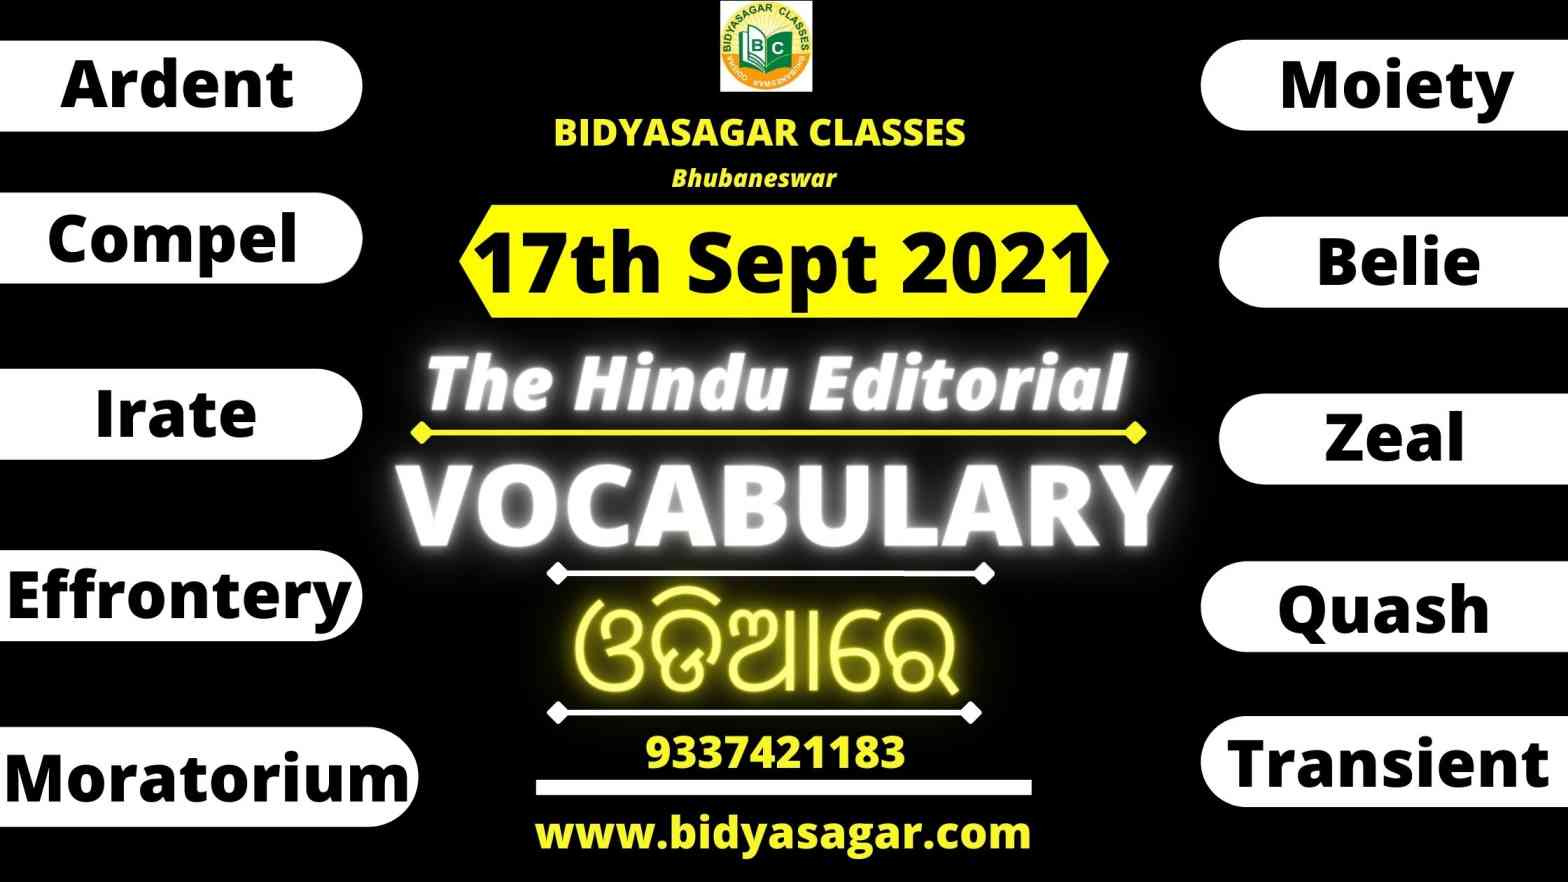 The Hindu Editorial Vocabulary of 17th September 2021